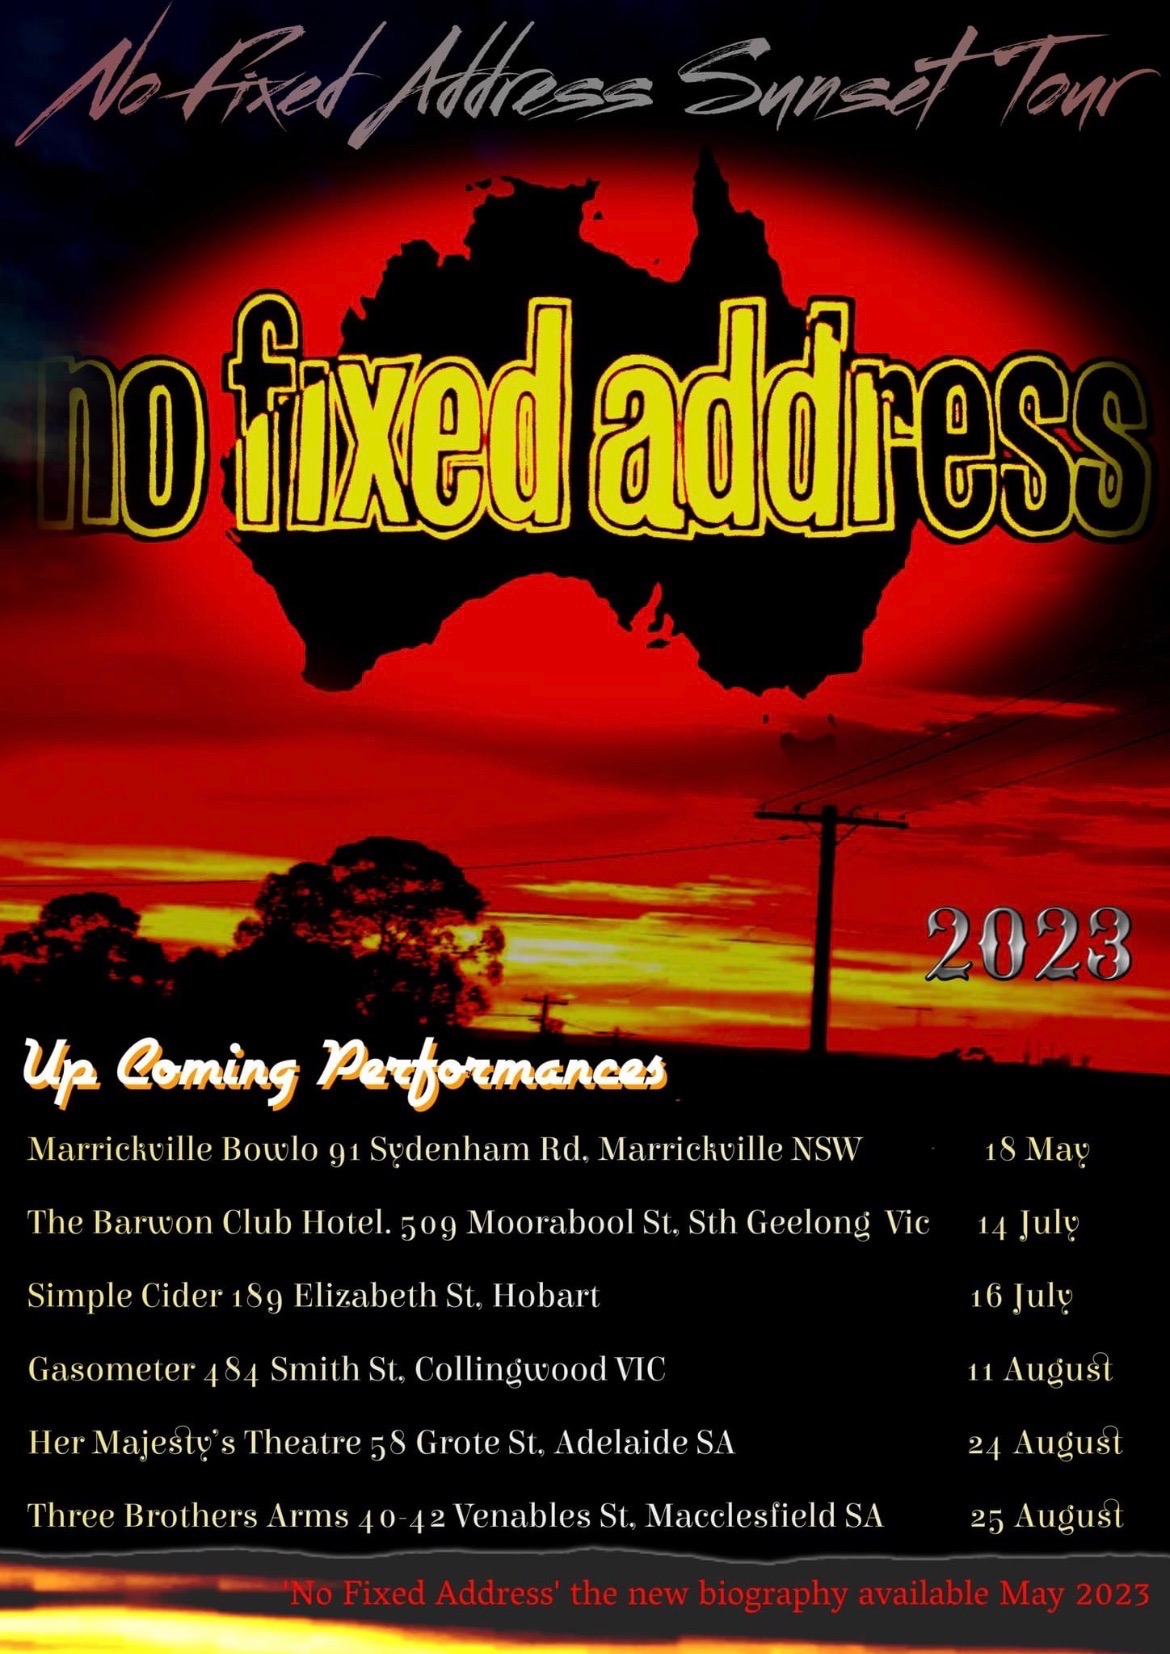 Flyer promoting No Fixed Address - Sunset Tour